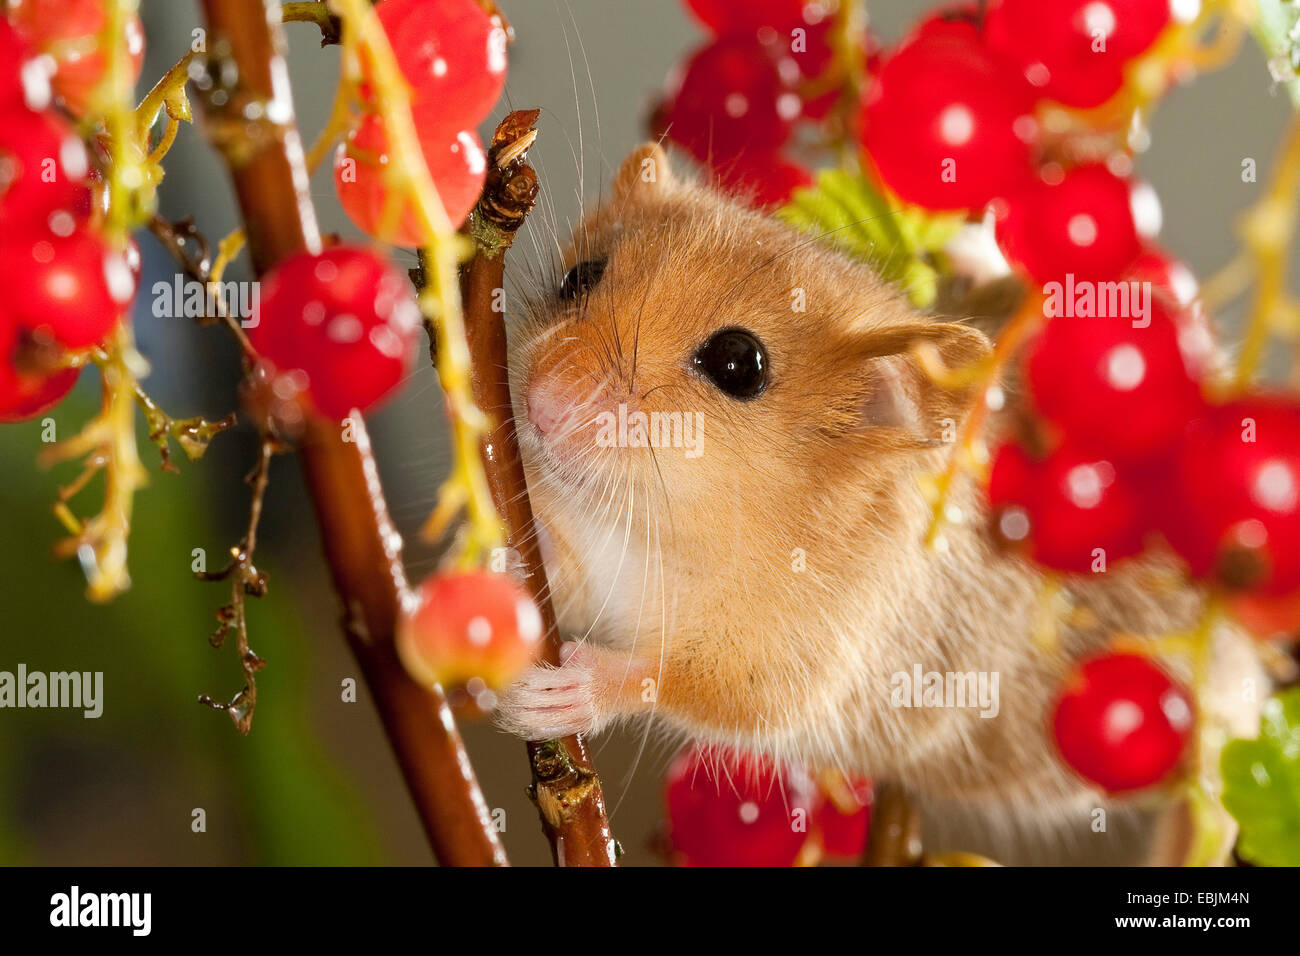 common dormouse, hazel dormouse (Muscardinus avellanarius), climbing in northern red currant bush between mature fruits, Germany Stock Photo